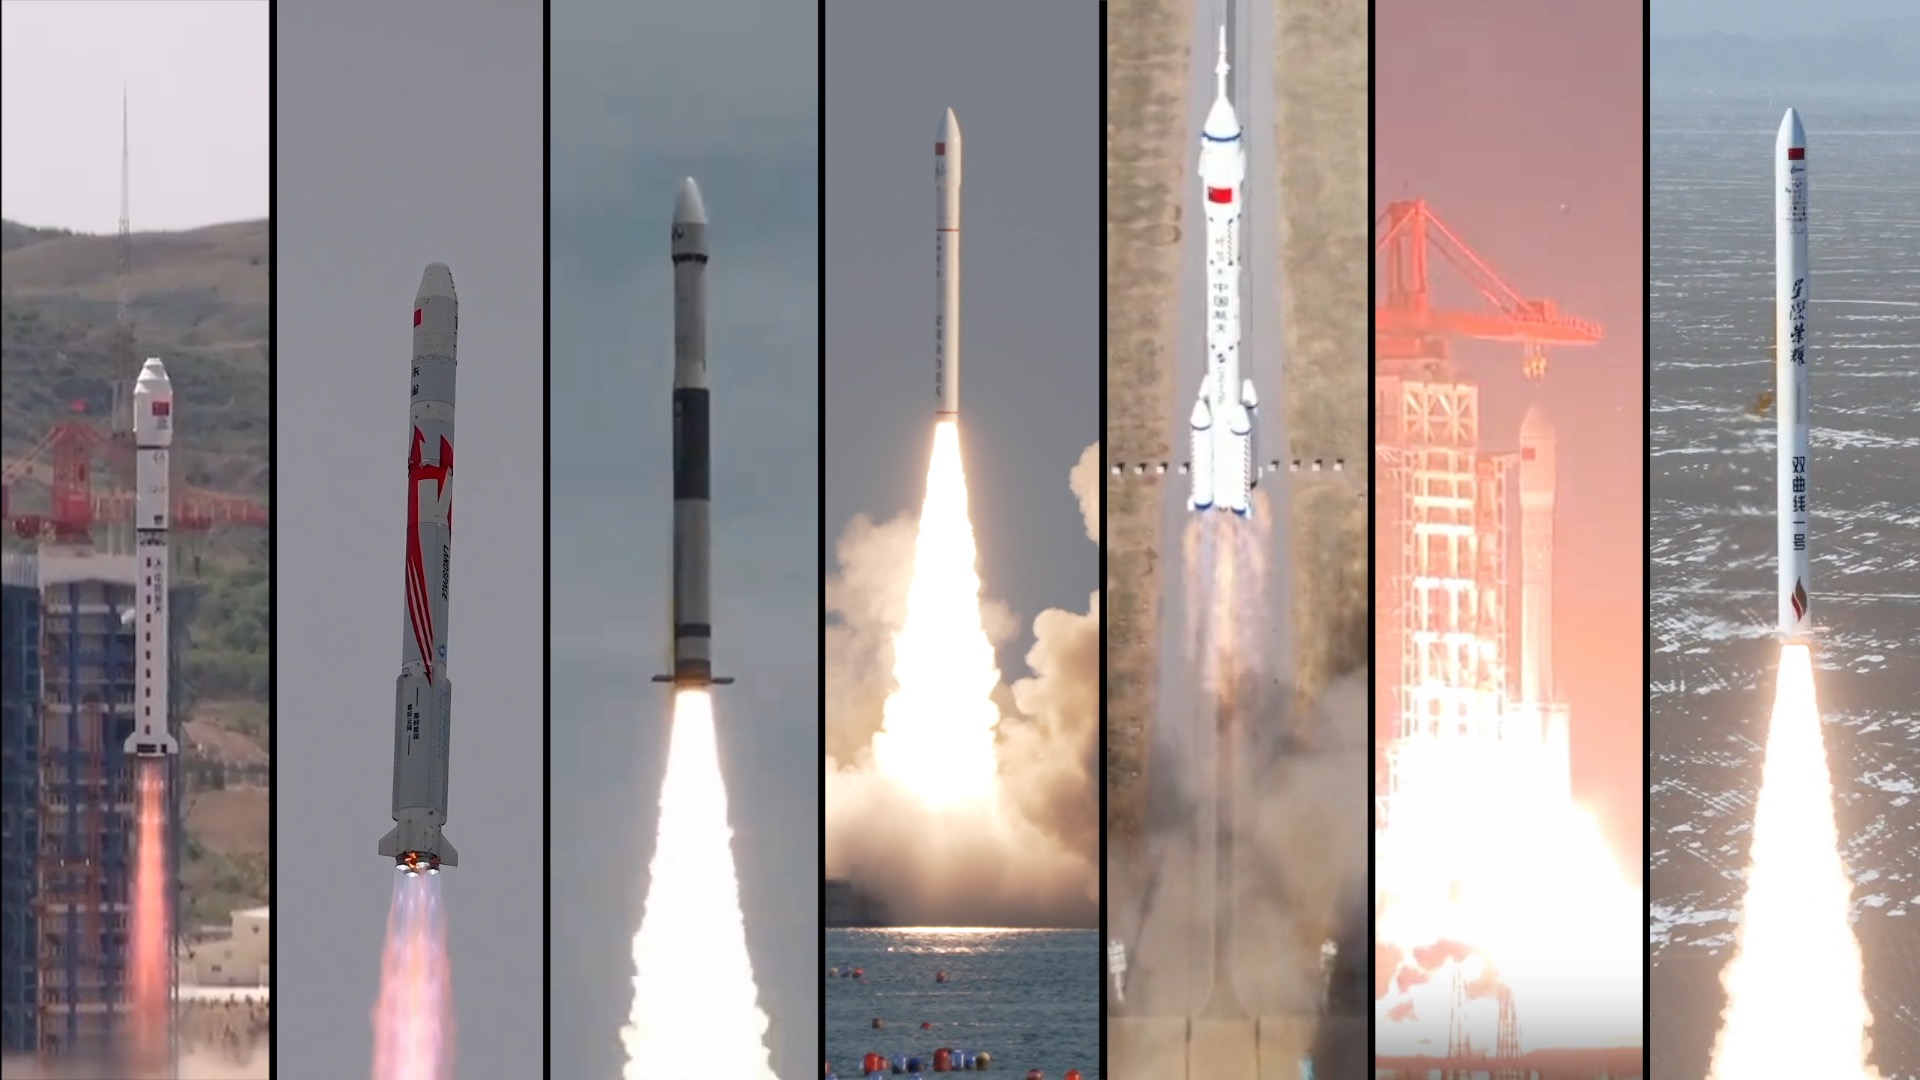 2023 Revisited: Recalling key moments in Chinese space exploration